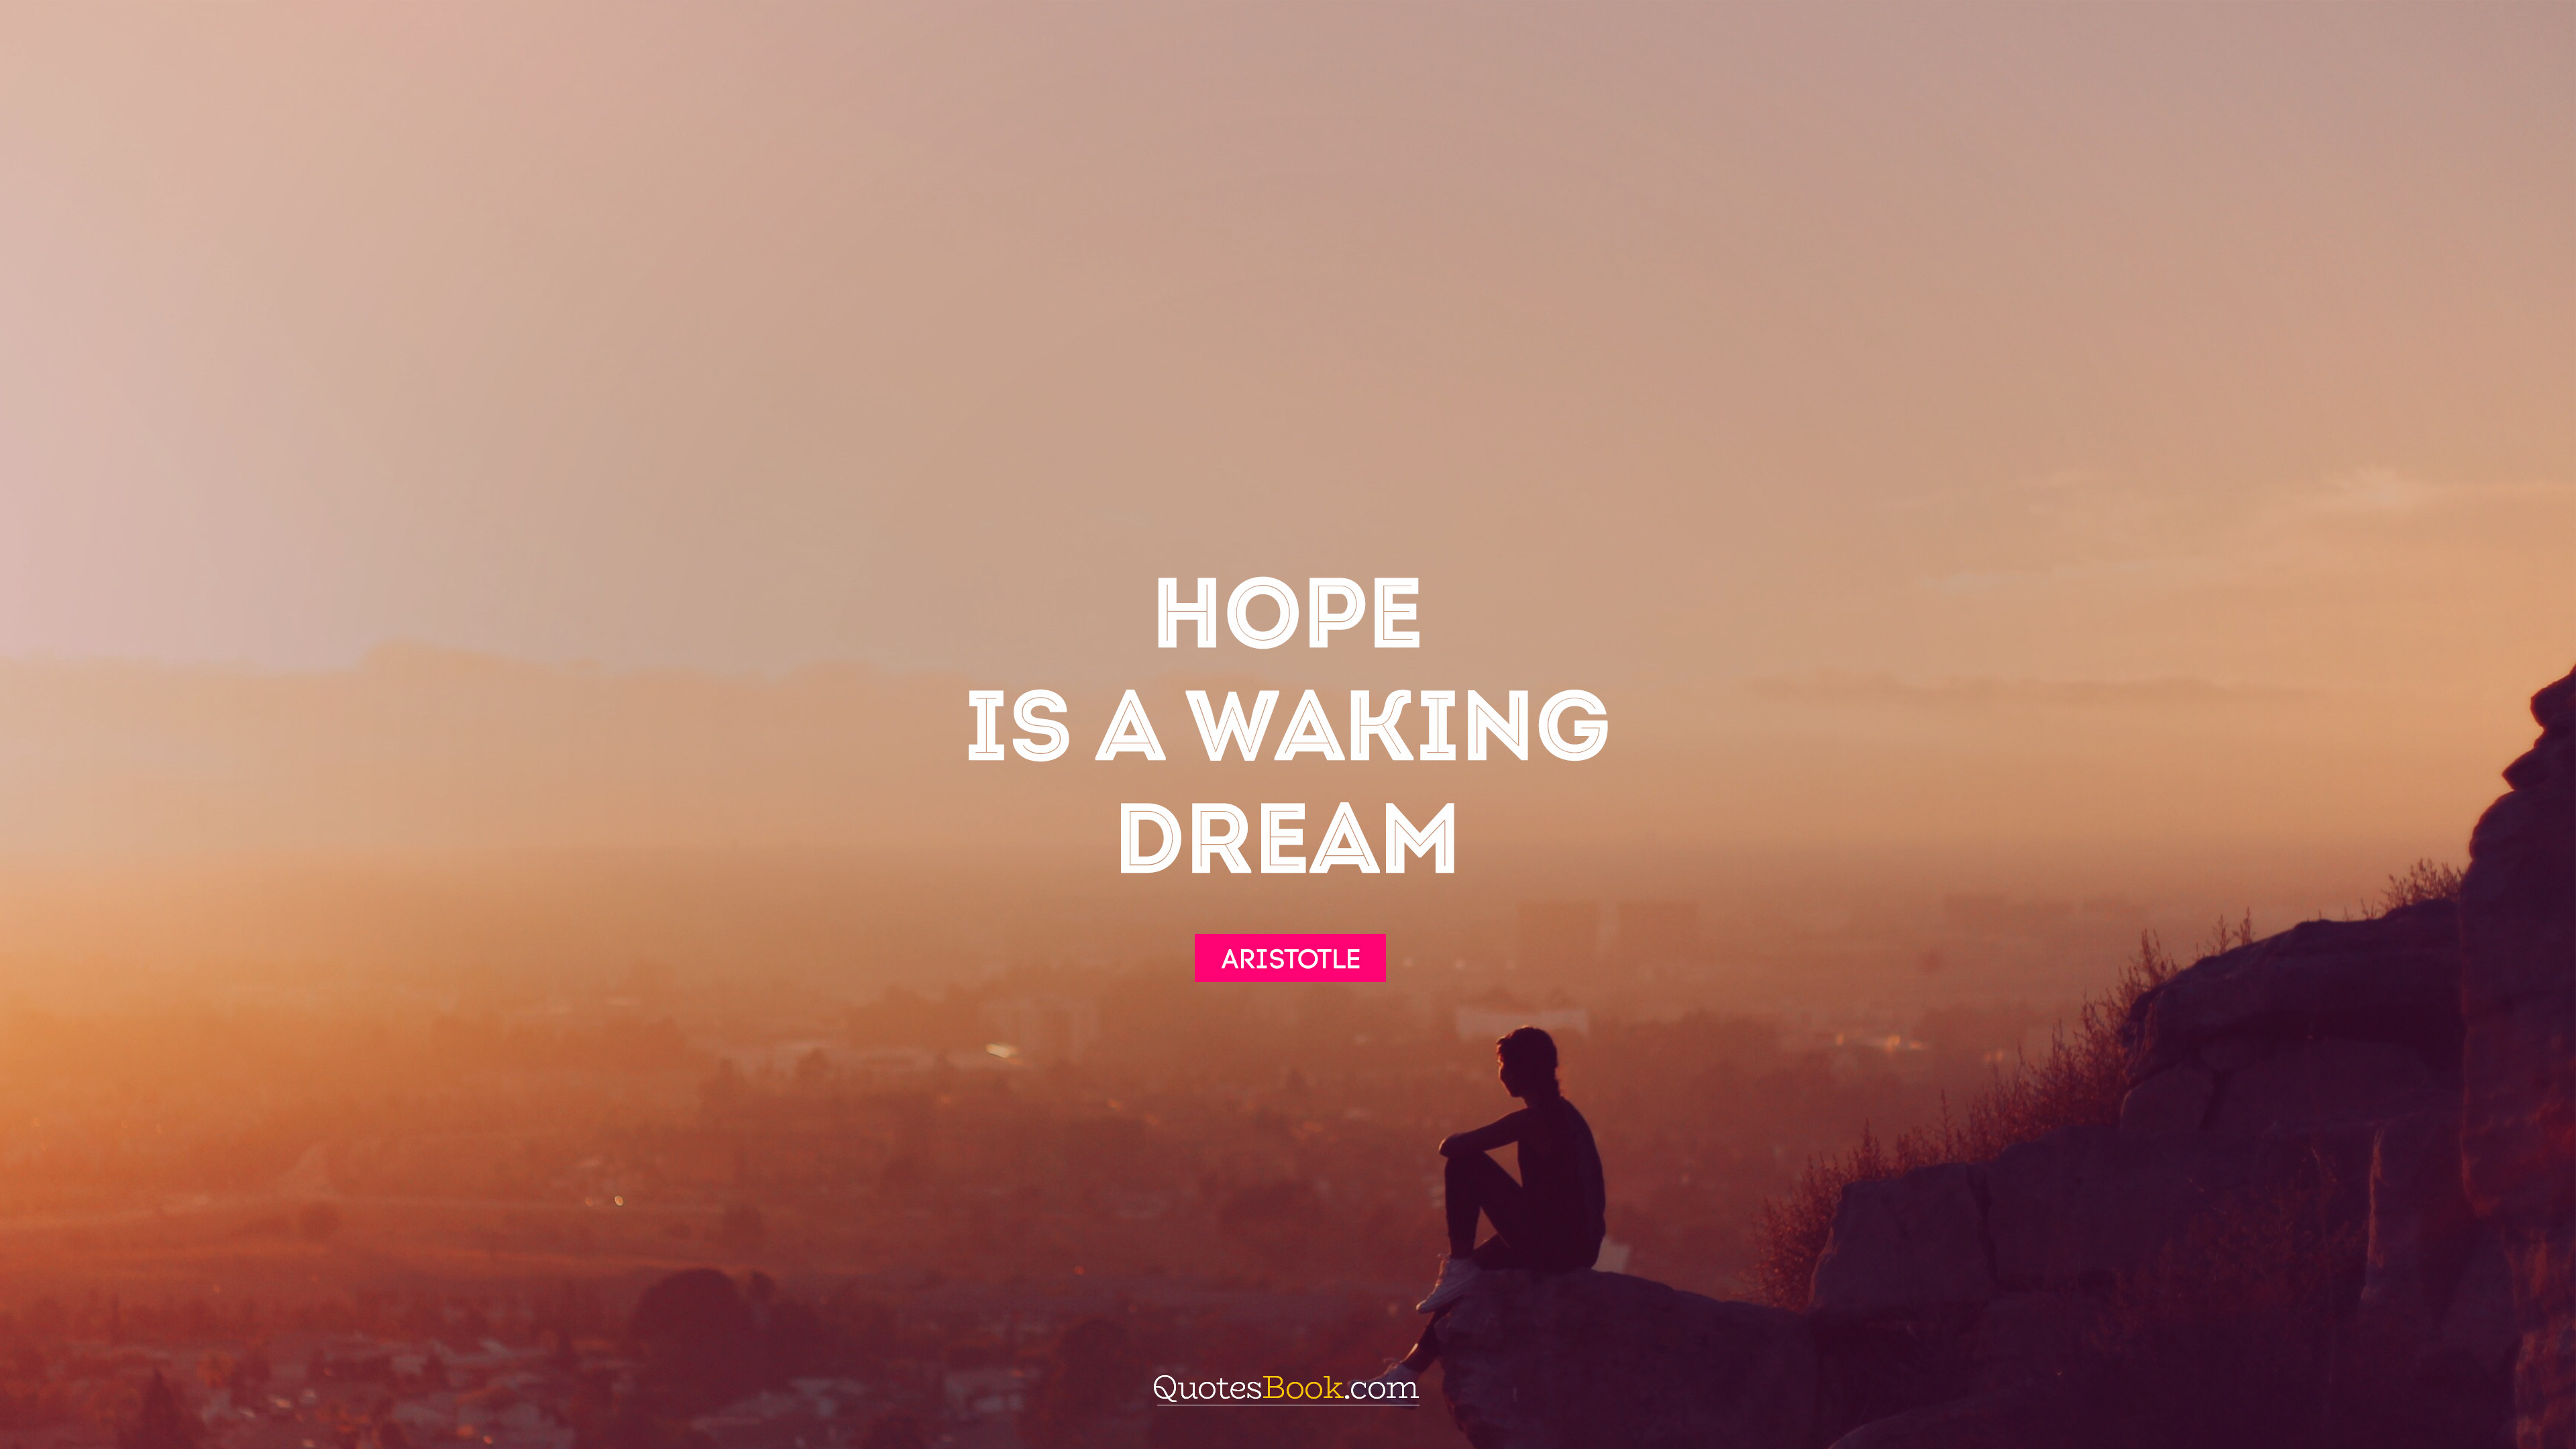 Hope is a waking dream. Quote by Aristotle QuotesBook